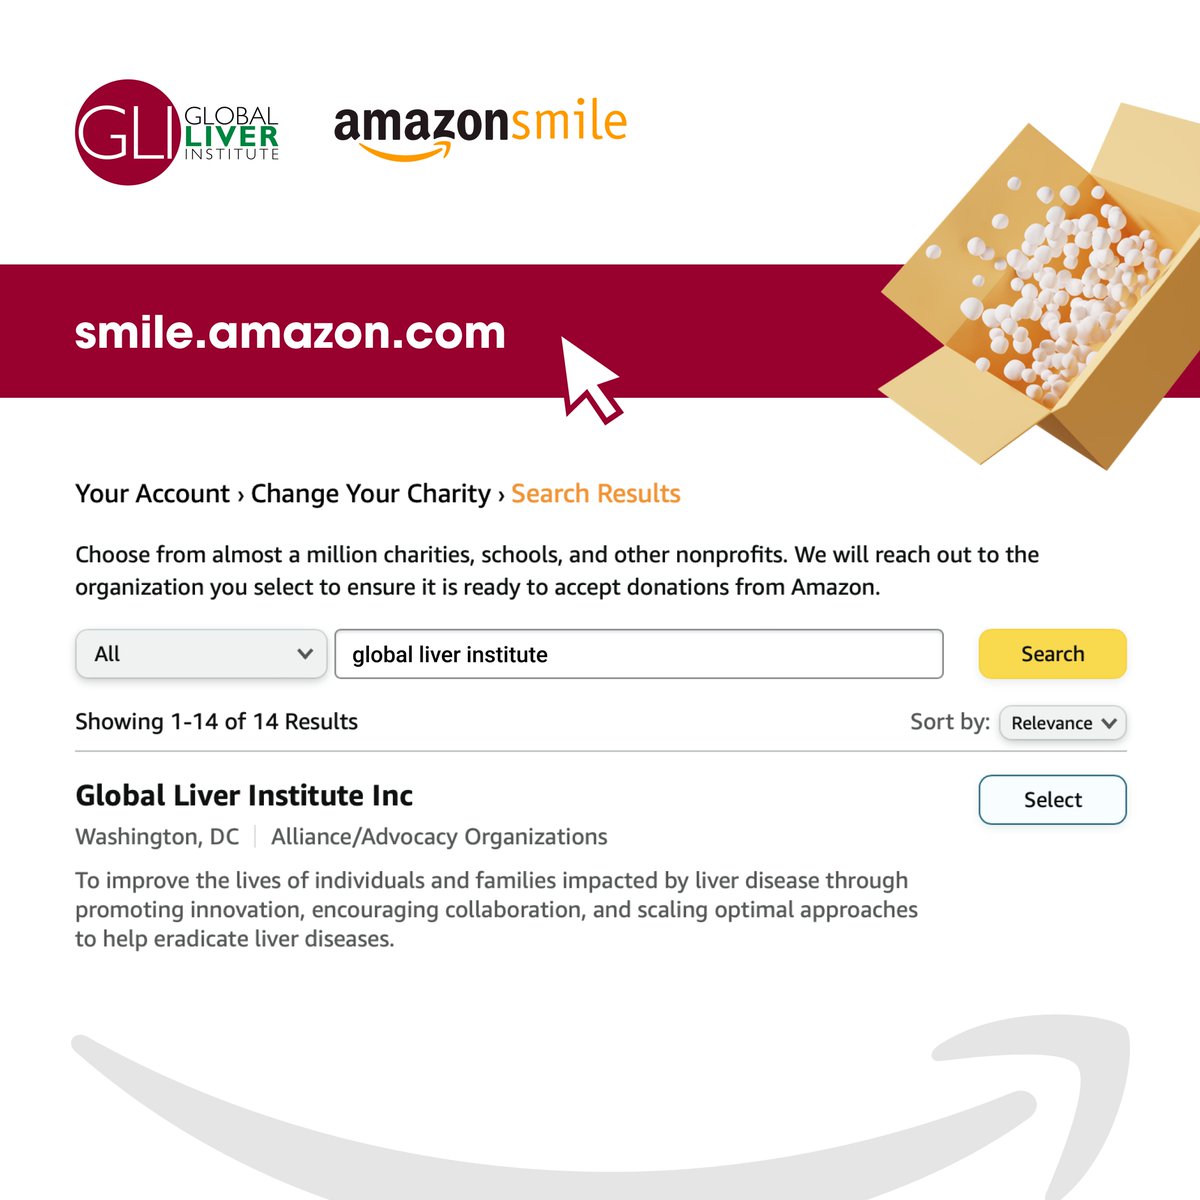 As we enter the season of giving, support GLI by selecting us as your preferred charity on @amazon Smile. 🦃🎄 A percentage of your eligible purchases will go towards our mission of empowering liver patients and eradicating #LiverDisease! ☃️ #LiverHealth #AmazonSmile #Holidays